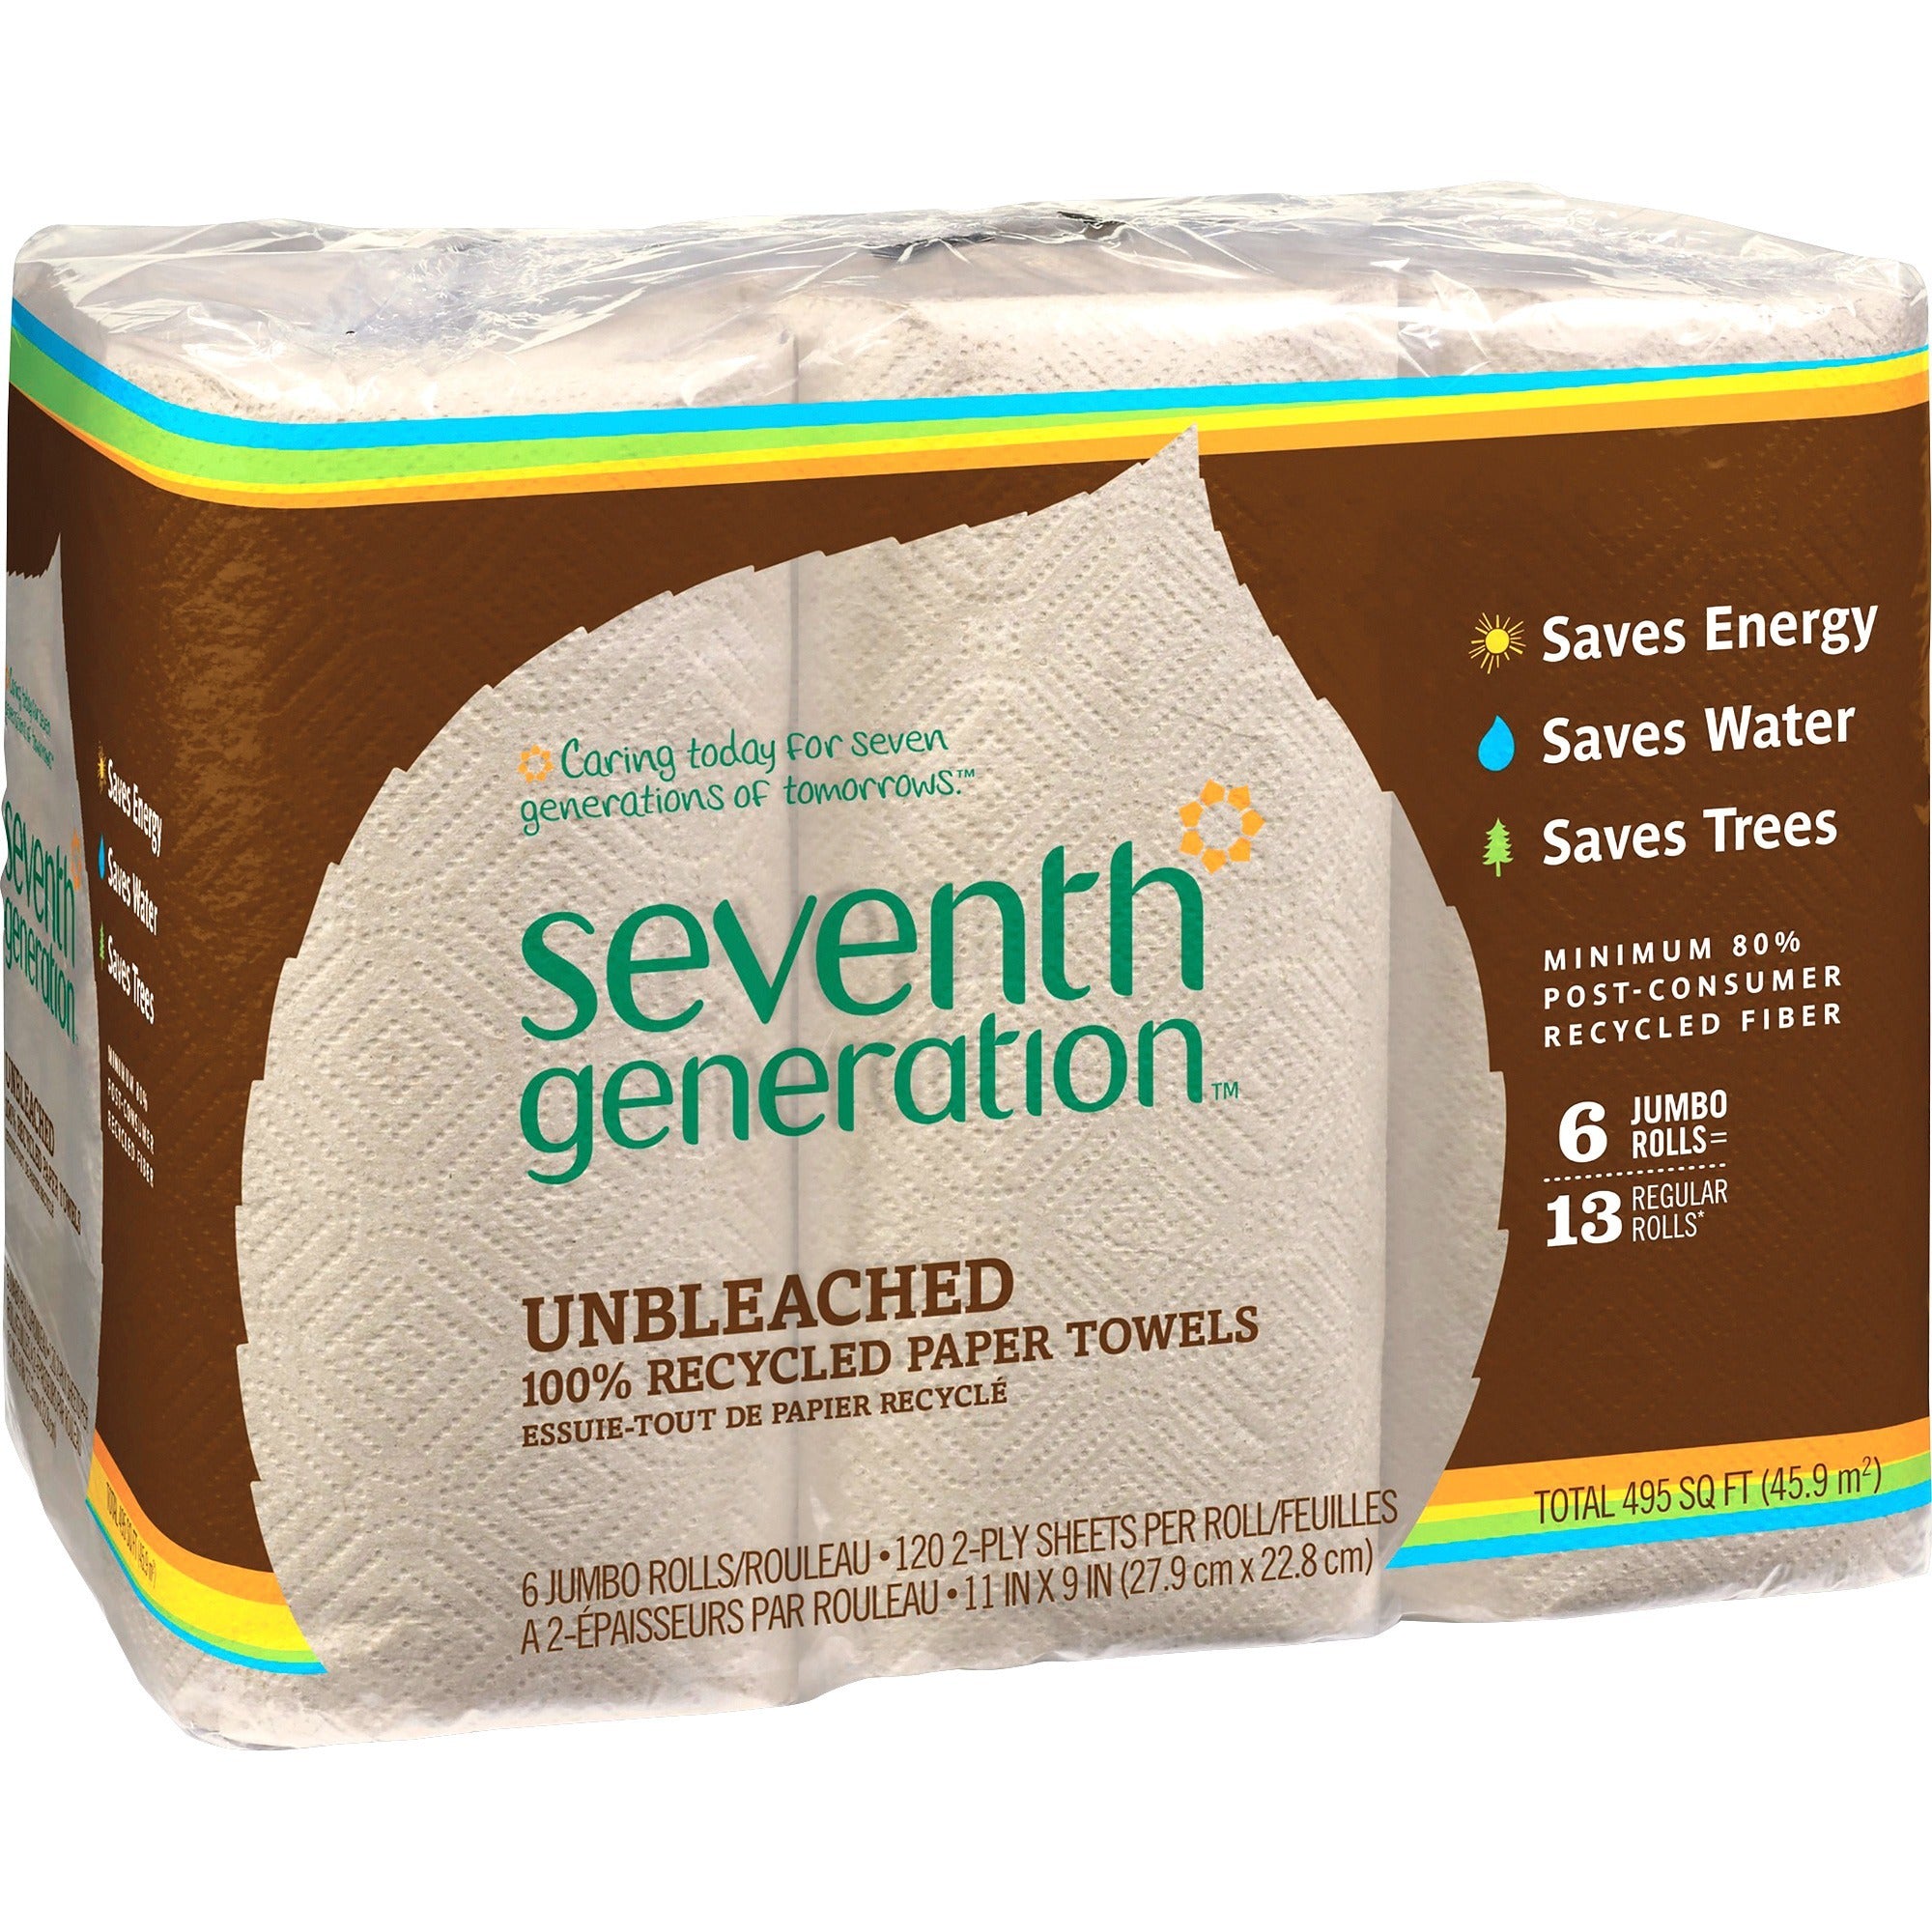 Seventh Generation 100% Recycled Paper Towels - 2 Ply - 11" x 9" - 120 Sheets/Roll - Natural - Paper - Unbleached, Chlorine-free, Fragrance-free, Dye-free, Ink-free, Absorbent - For Kitchen, Household - 6 Per Pack - 4 / Carton - 